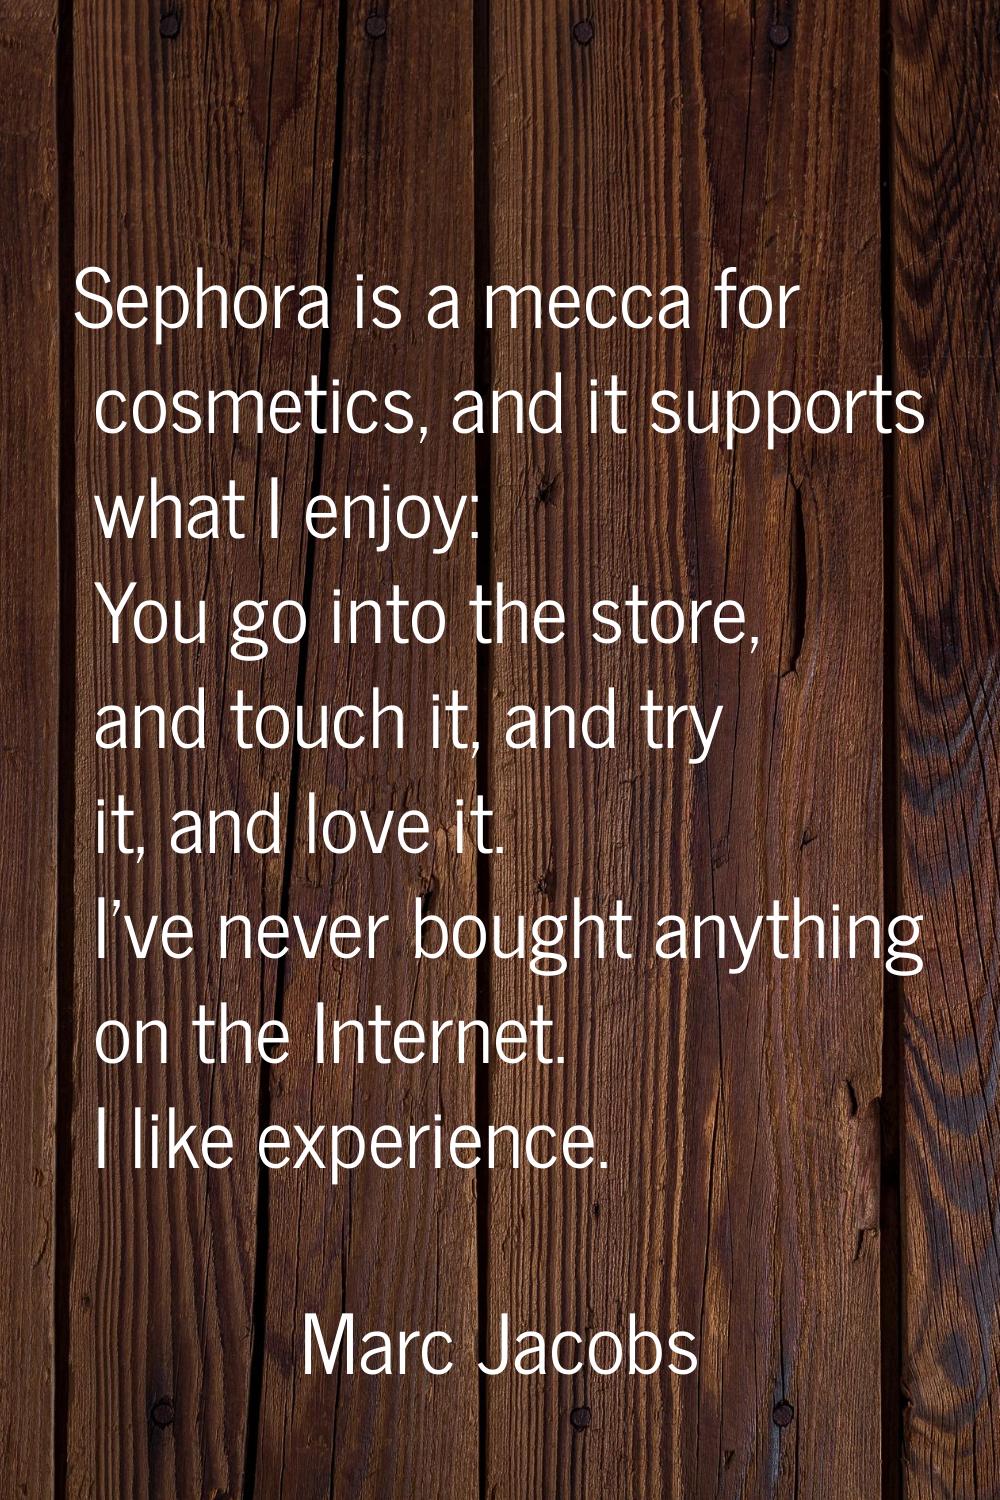 Sephora is a mecca for cosmetics, and it supports what I enjoy: You go into the store, and touch it